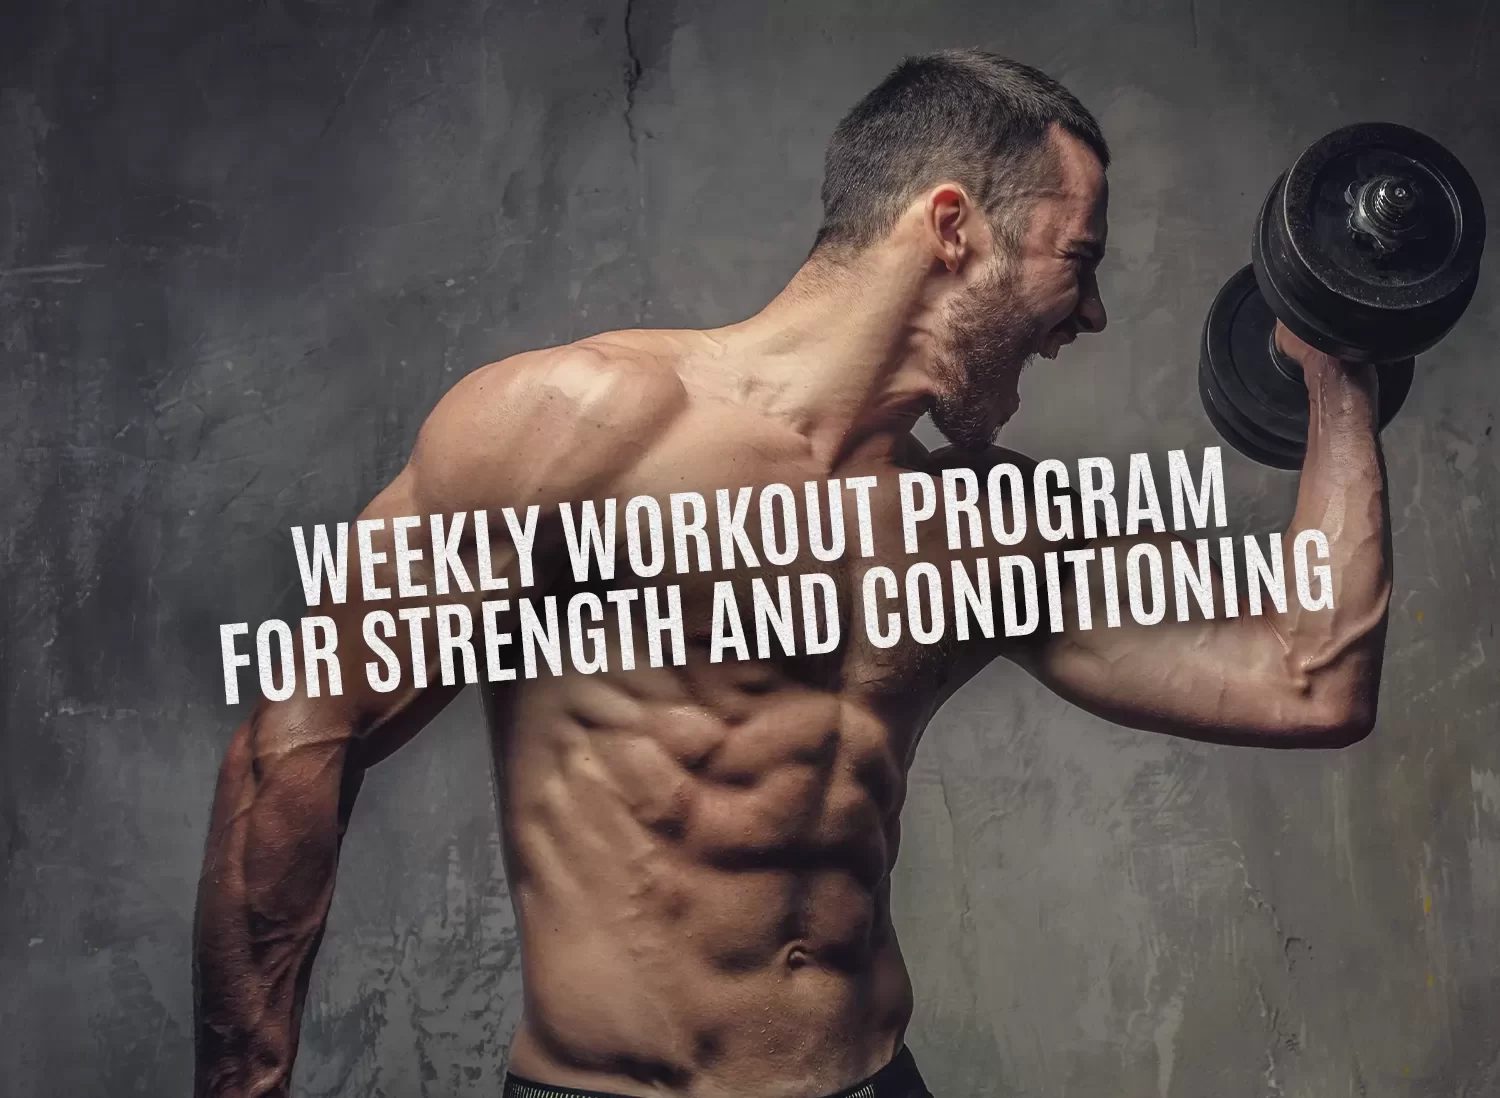 Weekly workout program